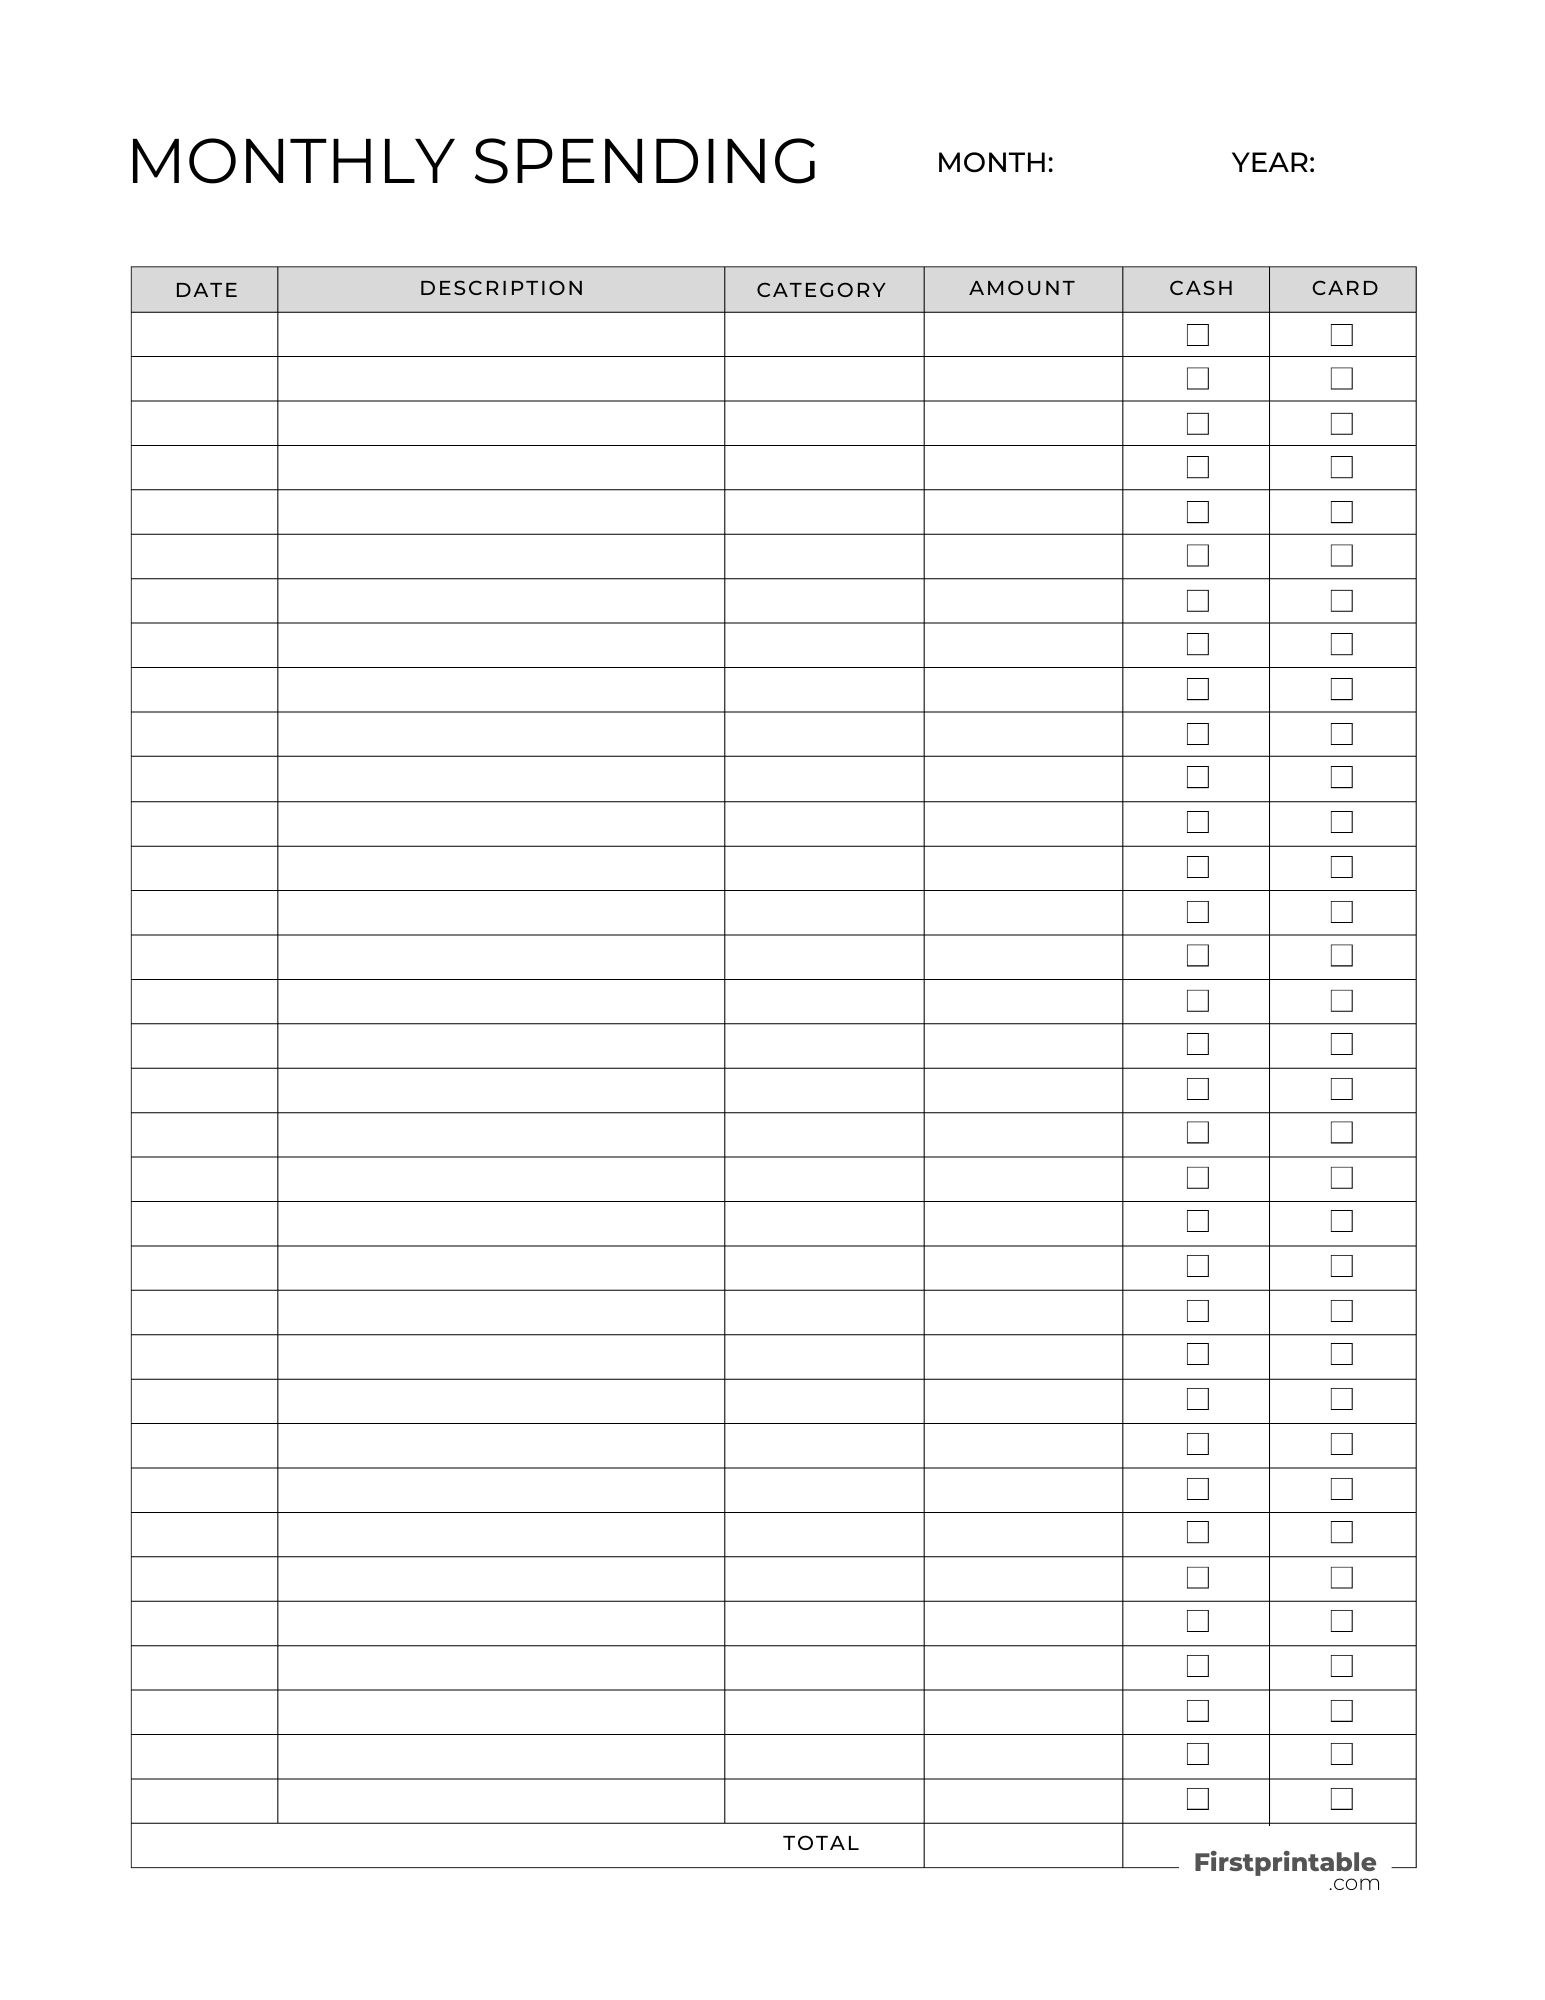 Monthly Spending - Budget Planner